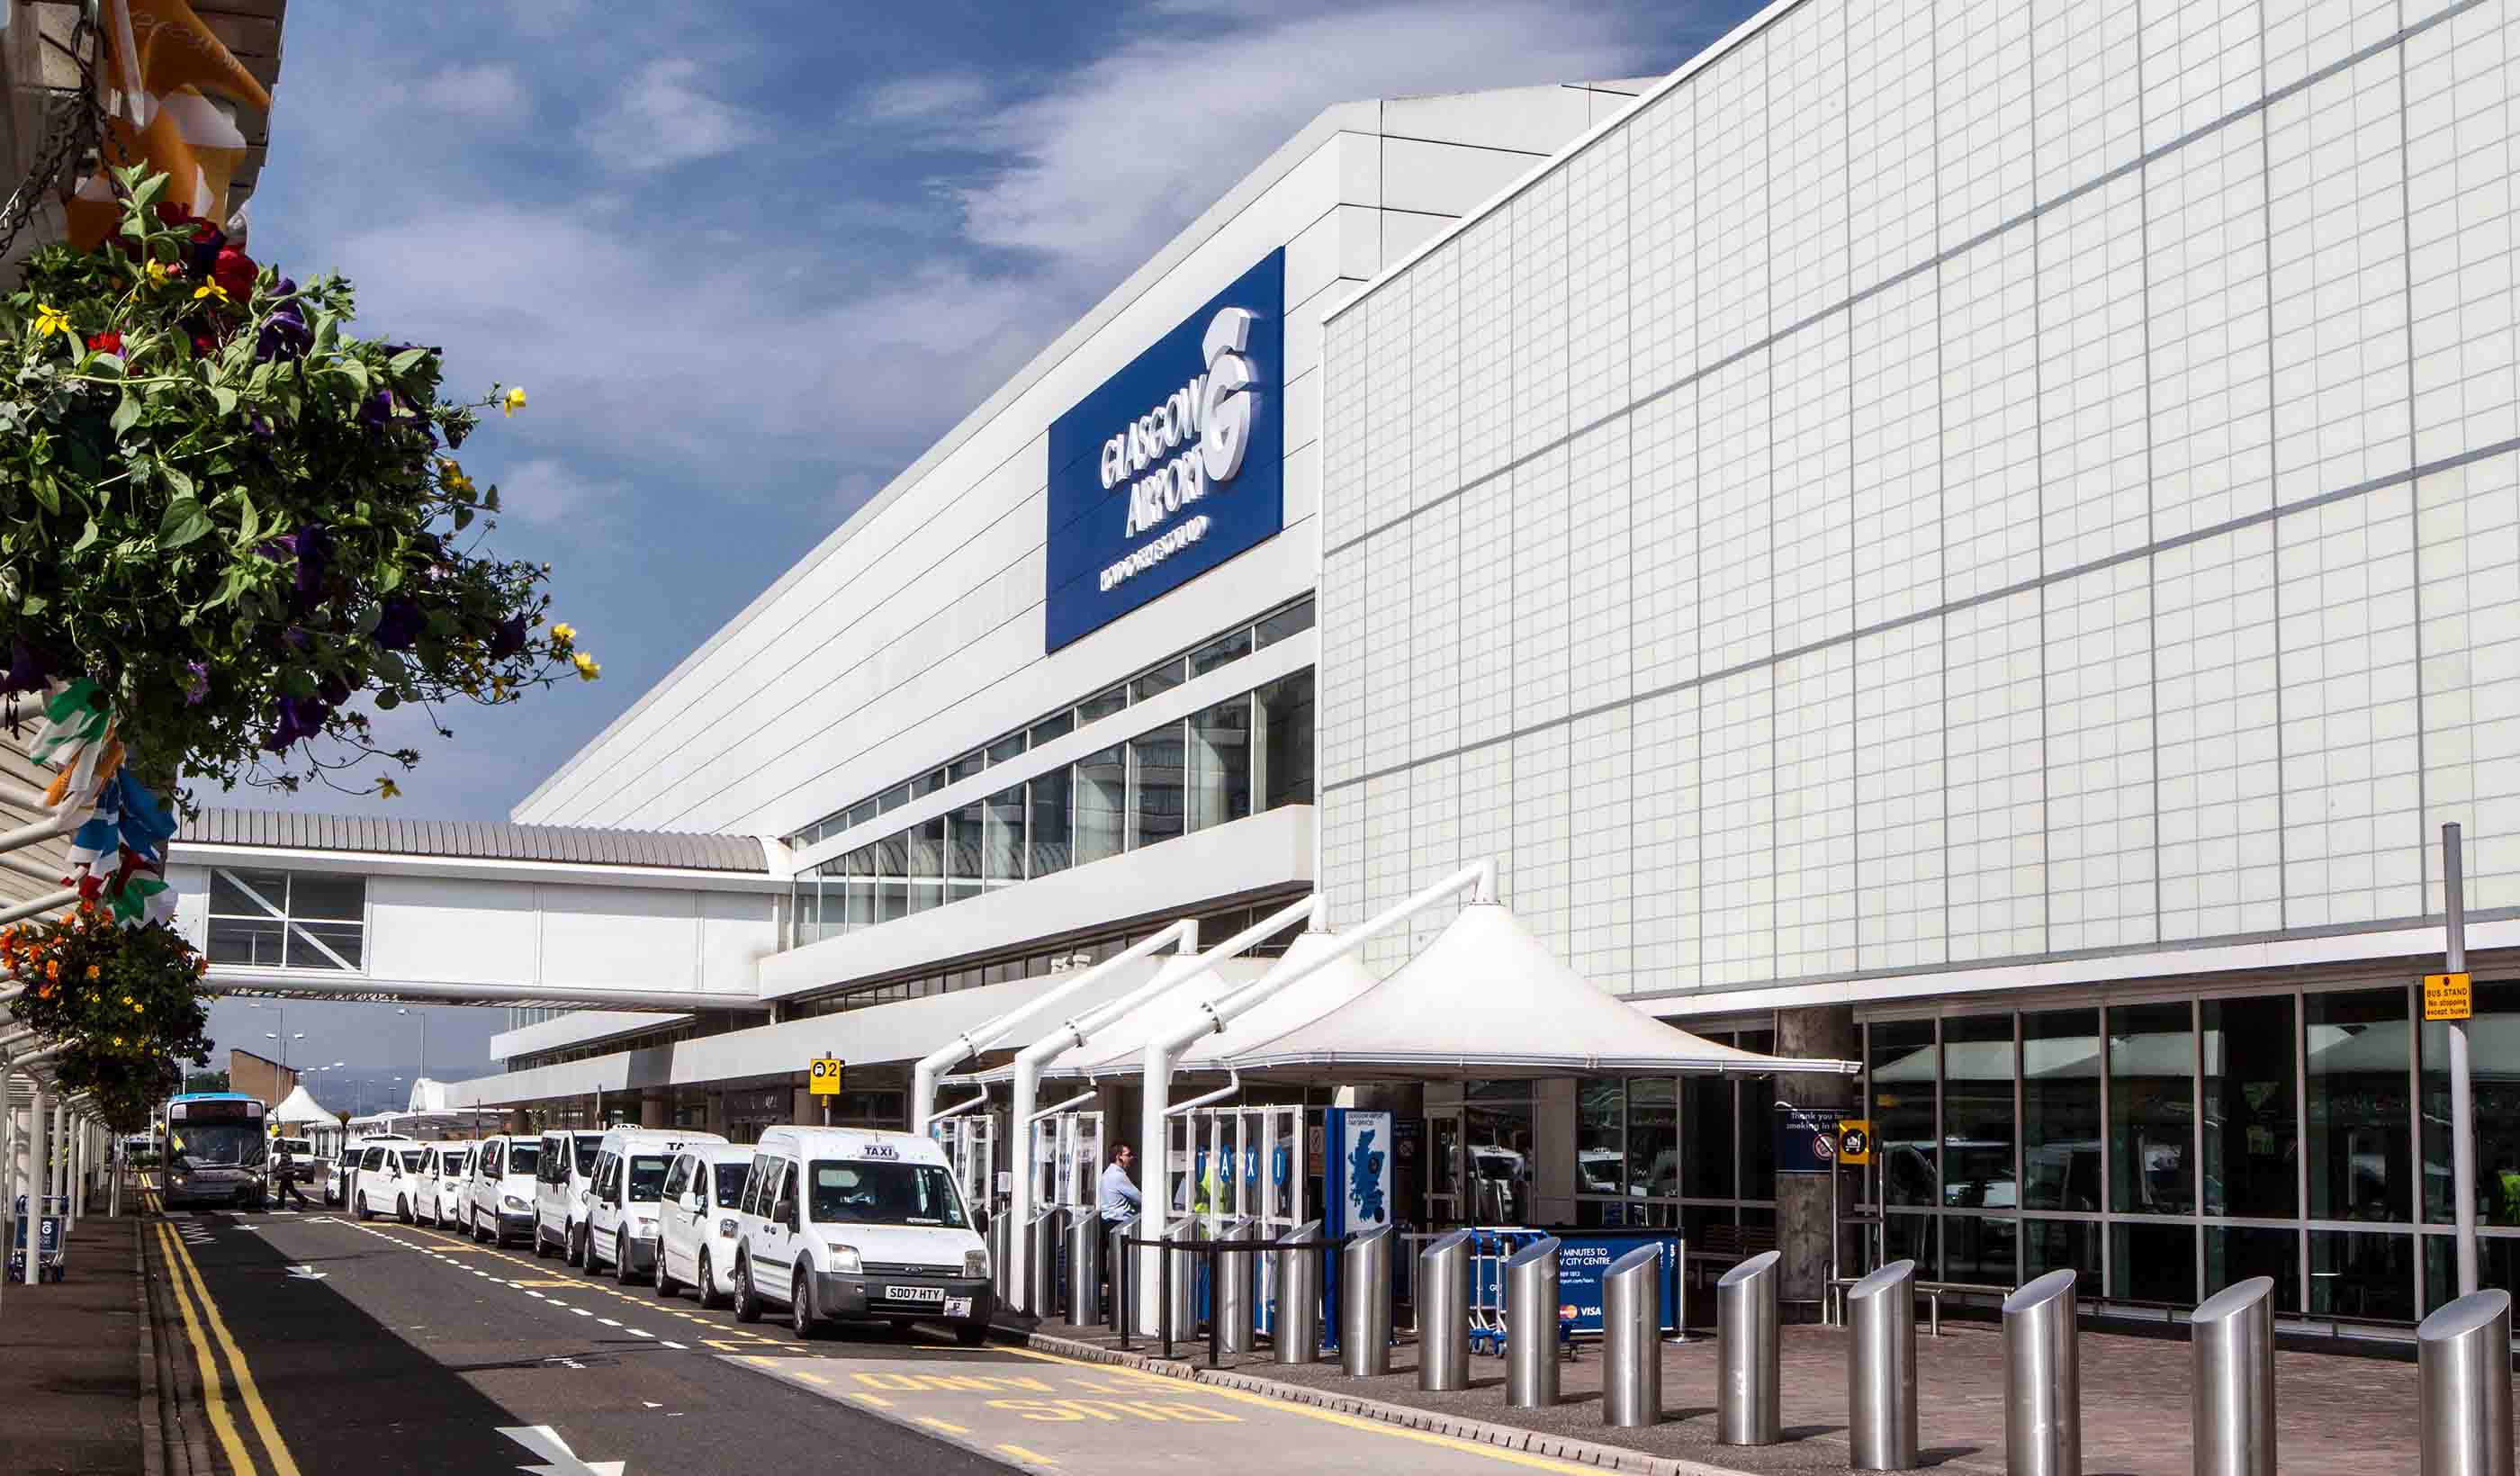 Glasgow Airport Access Project